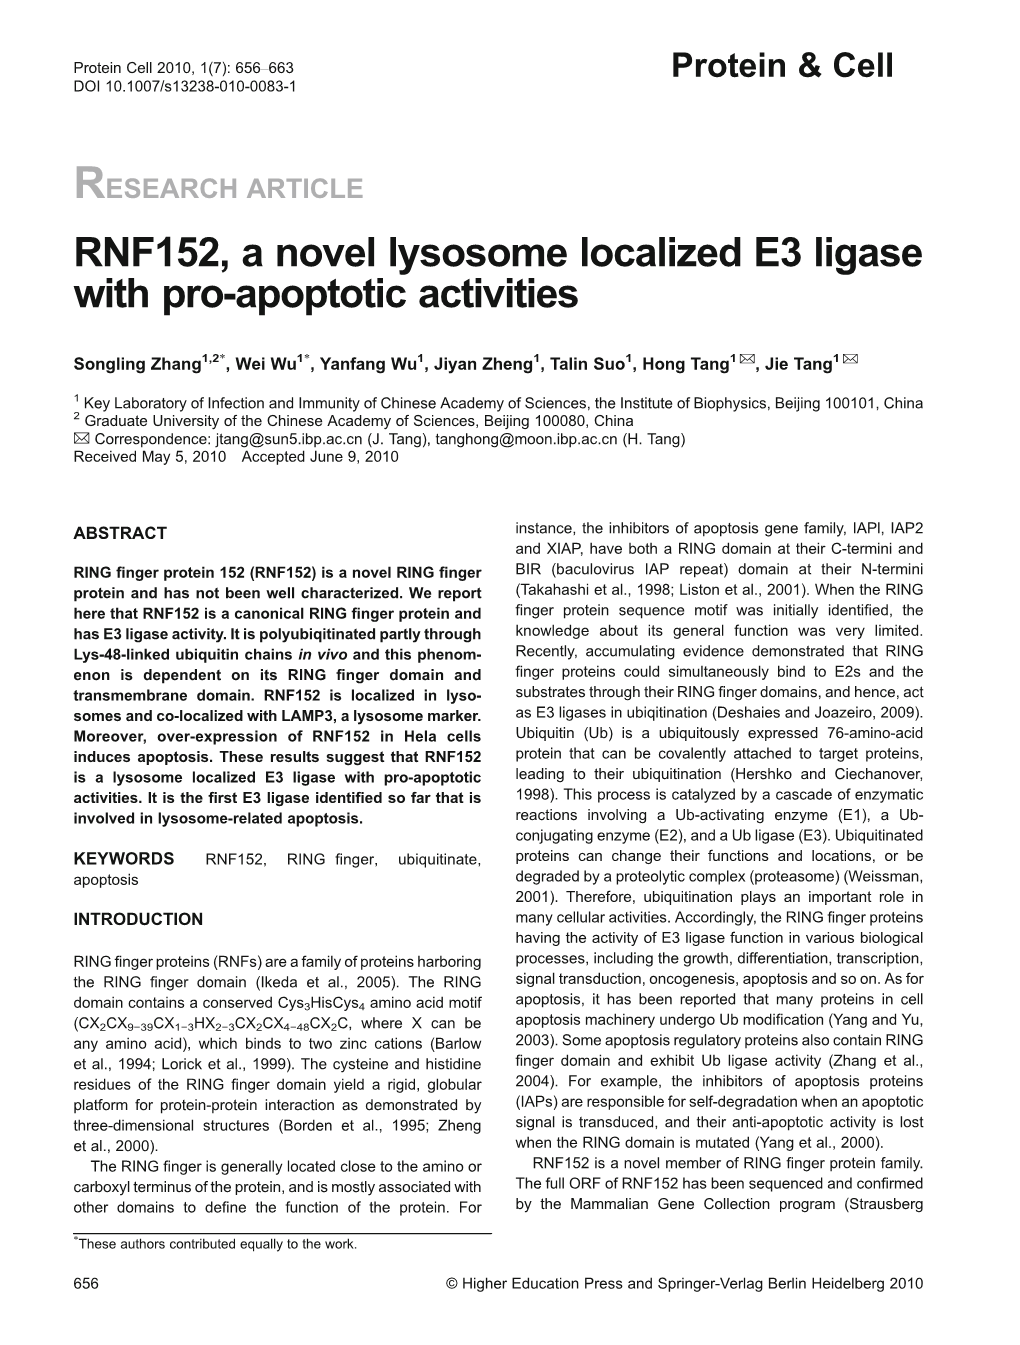 RNF152, a Novel Lysosome Localized E3 Ligase with Pro-Apoptotic Activities